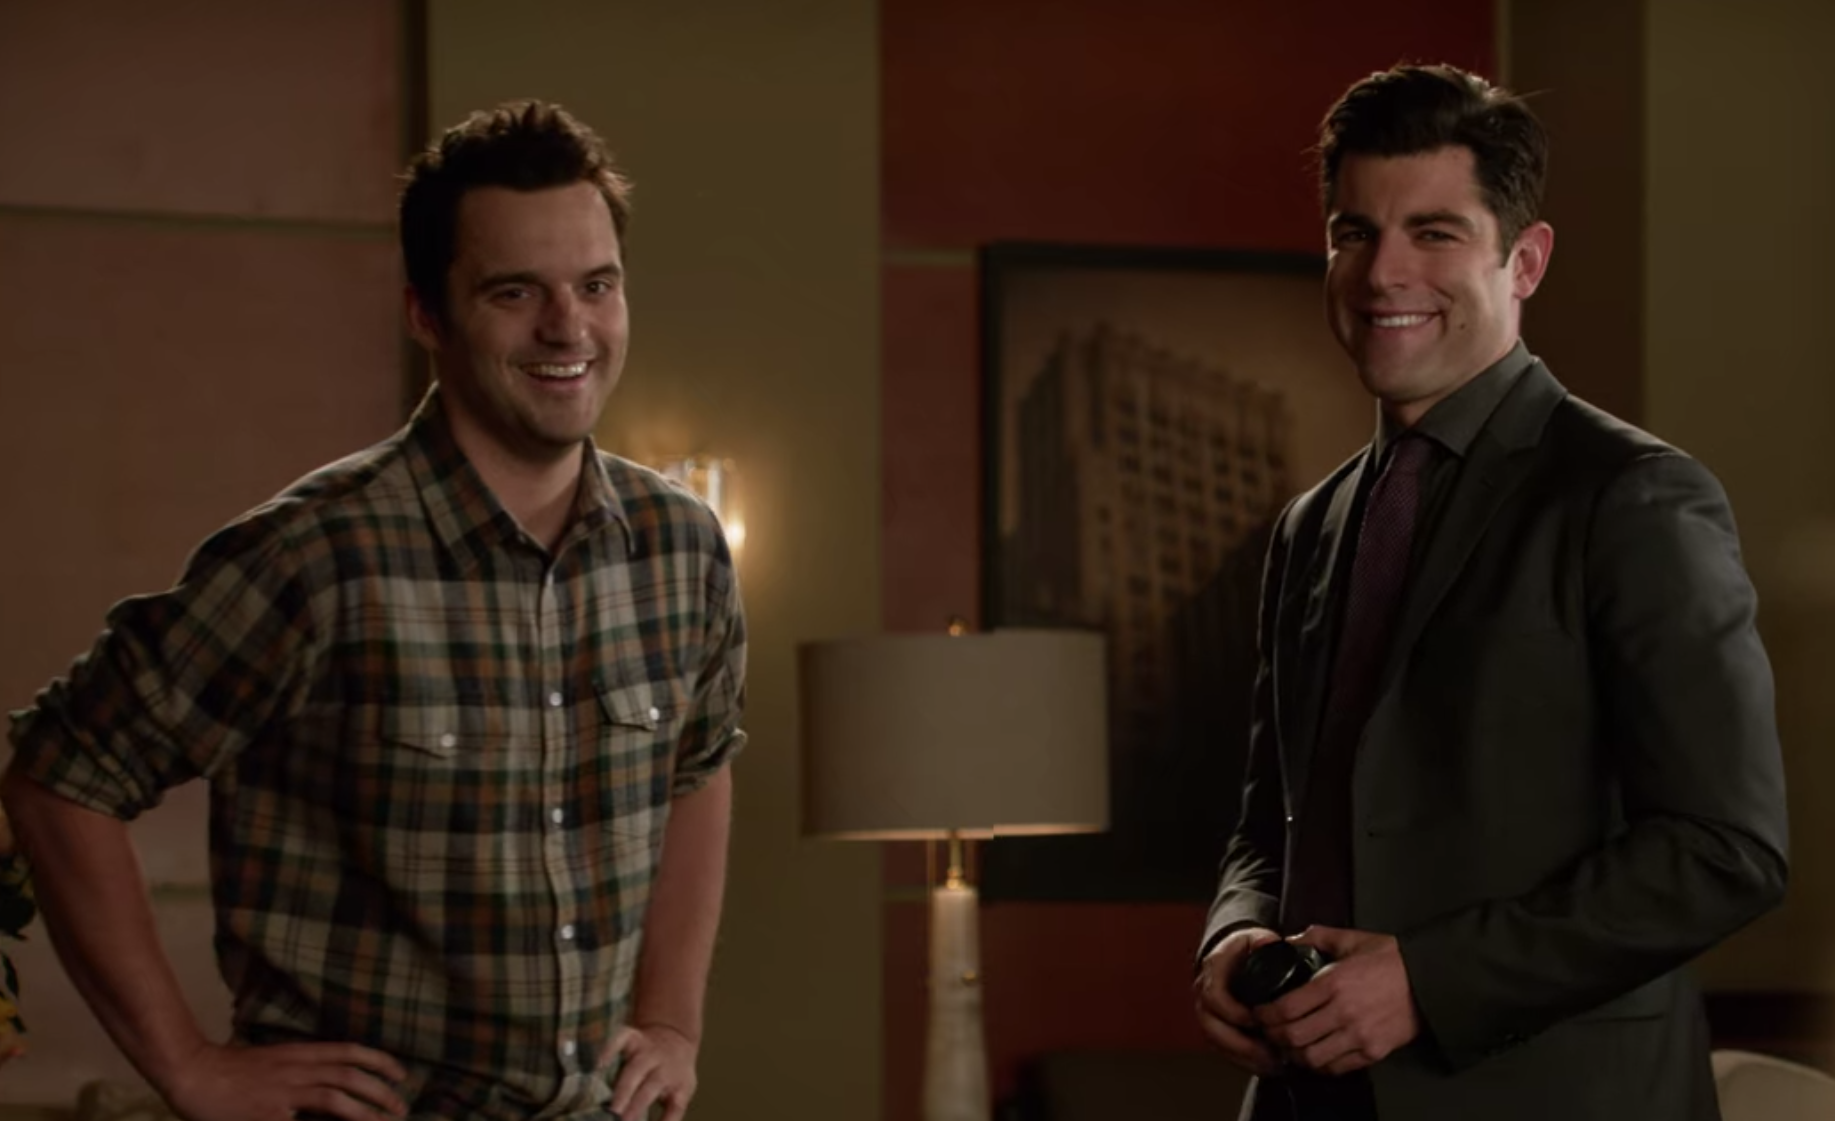 Nick Miller, smiling with hands on hips, wears a brown, red, and green checkered flannel shirt while Schmidt wears a dark-gray suit